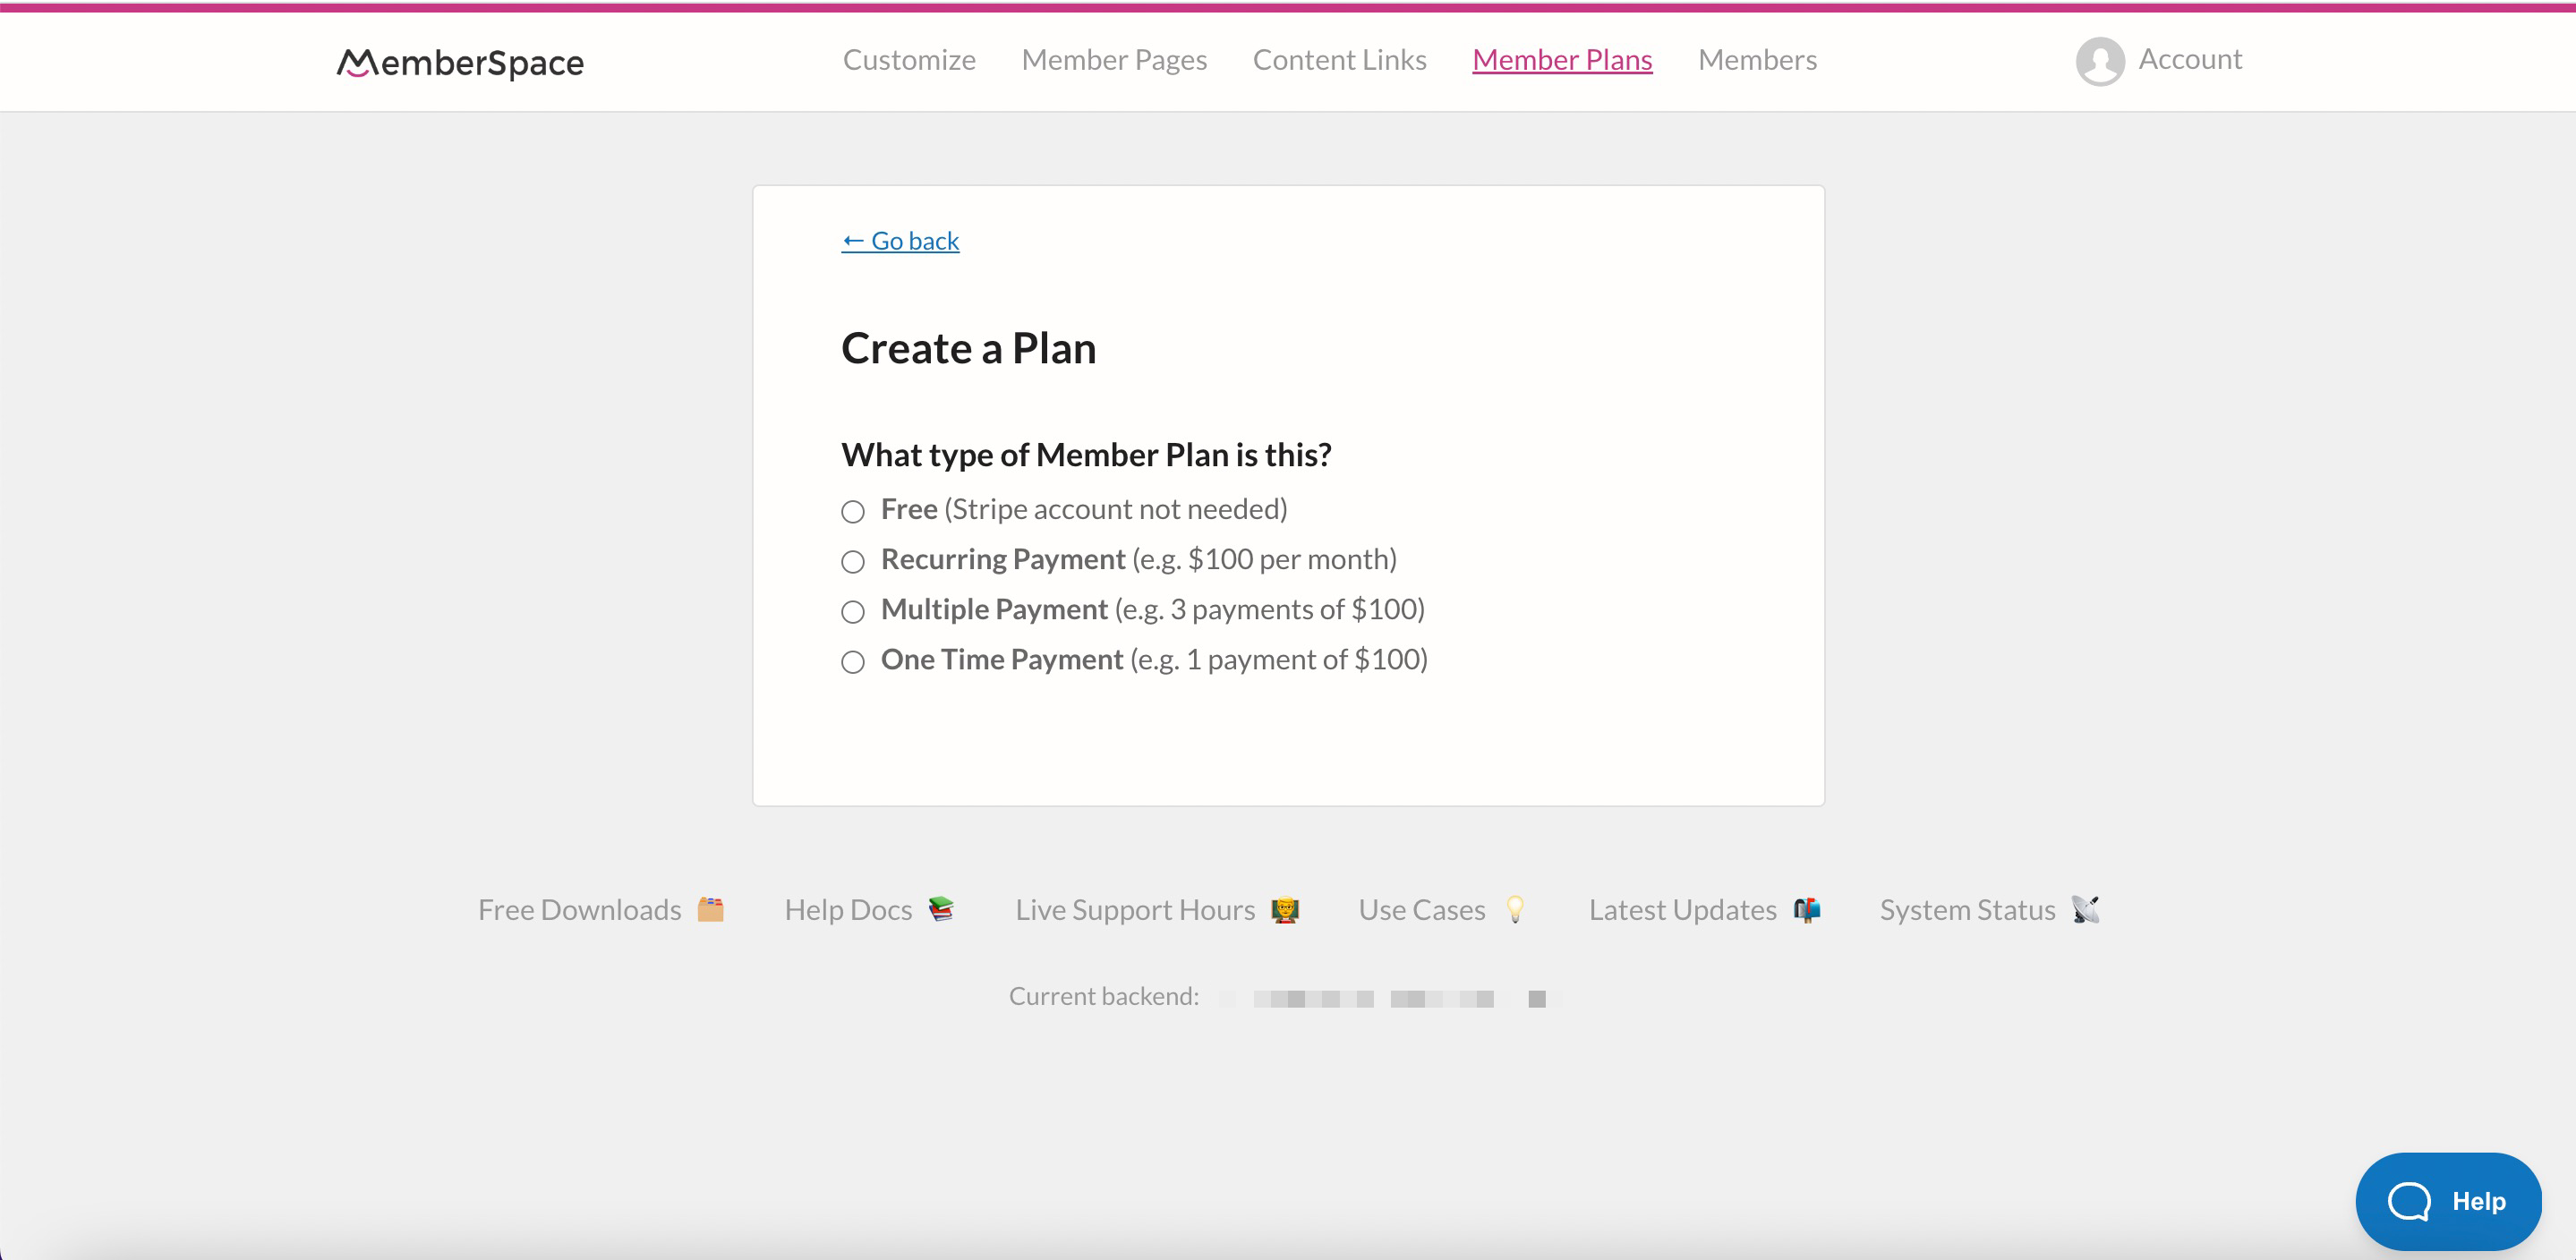 Create free or paid in-person events in MemberSpace